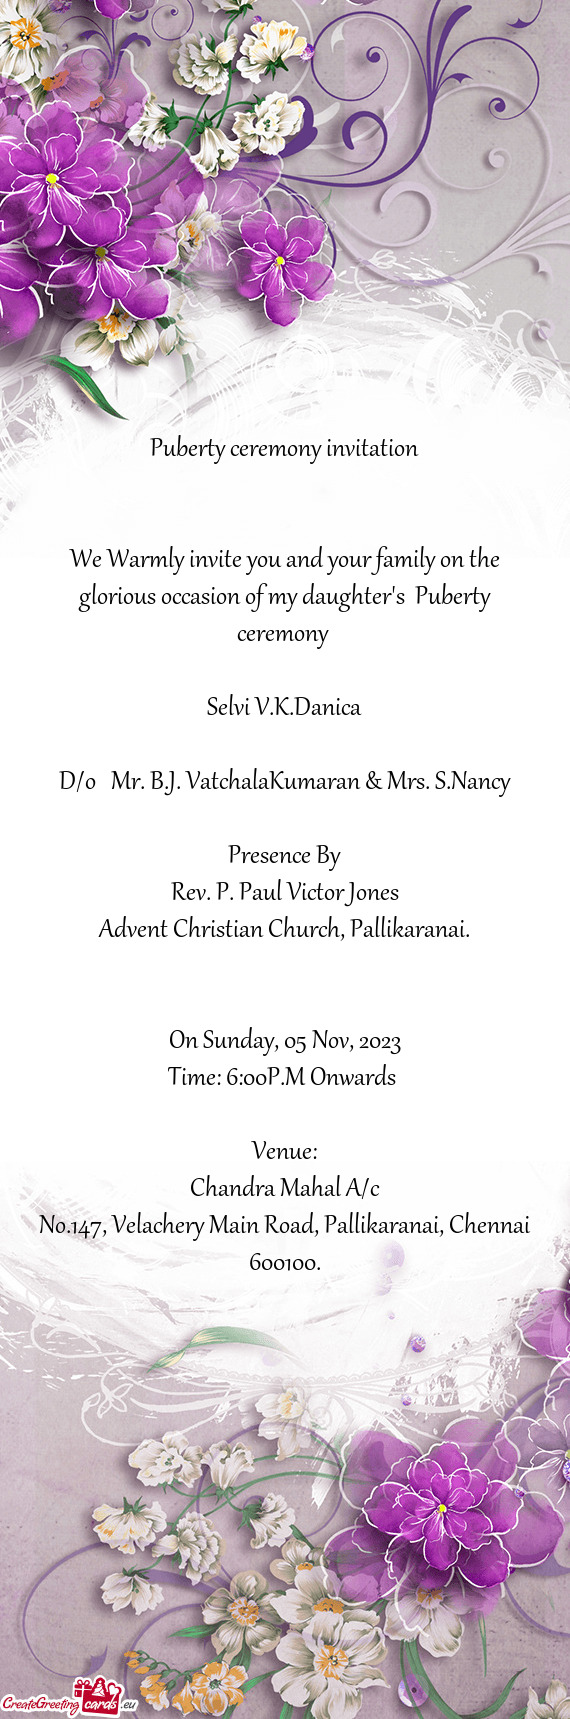 We Warmly invite you and your family on the glorious occasion of my daughter